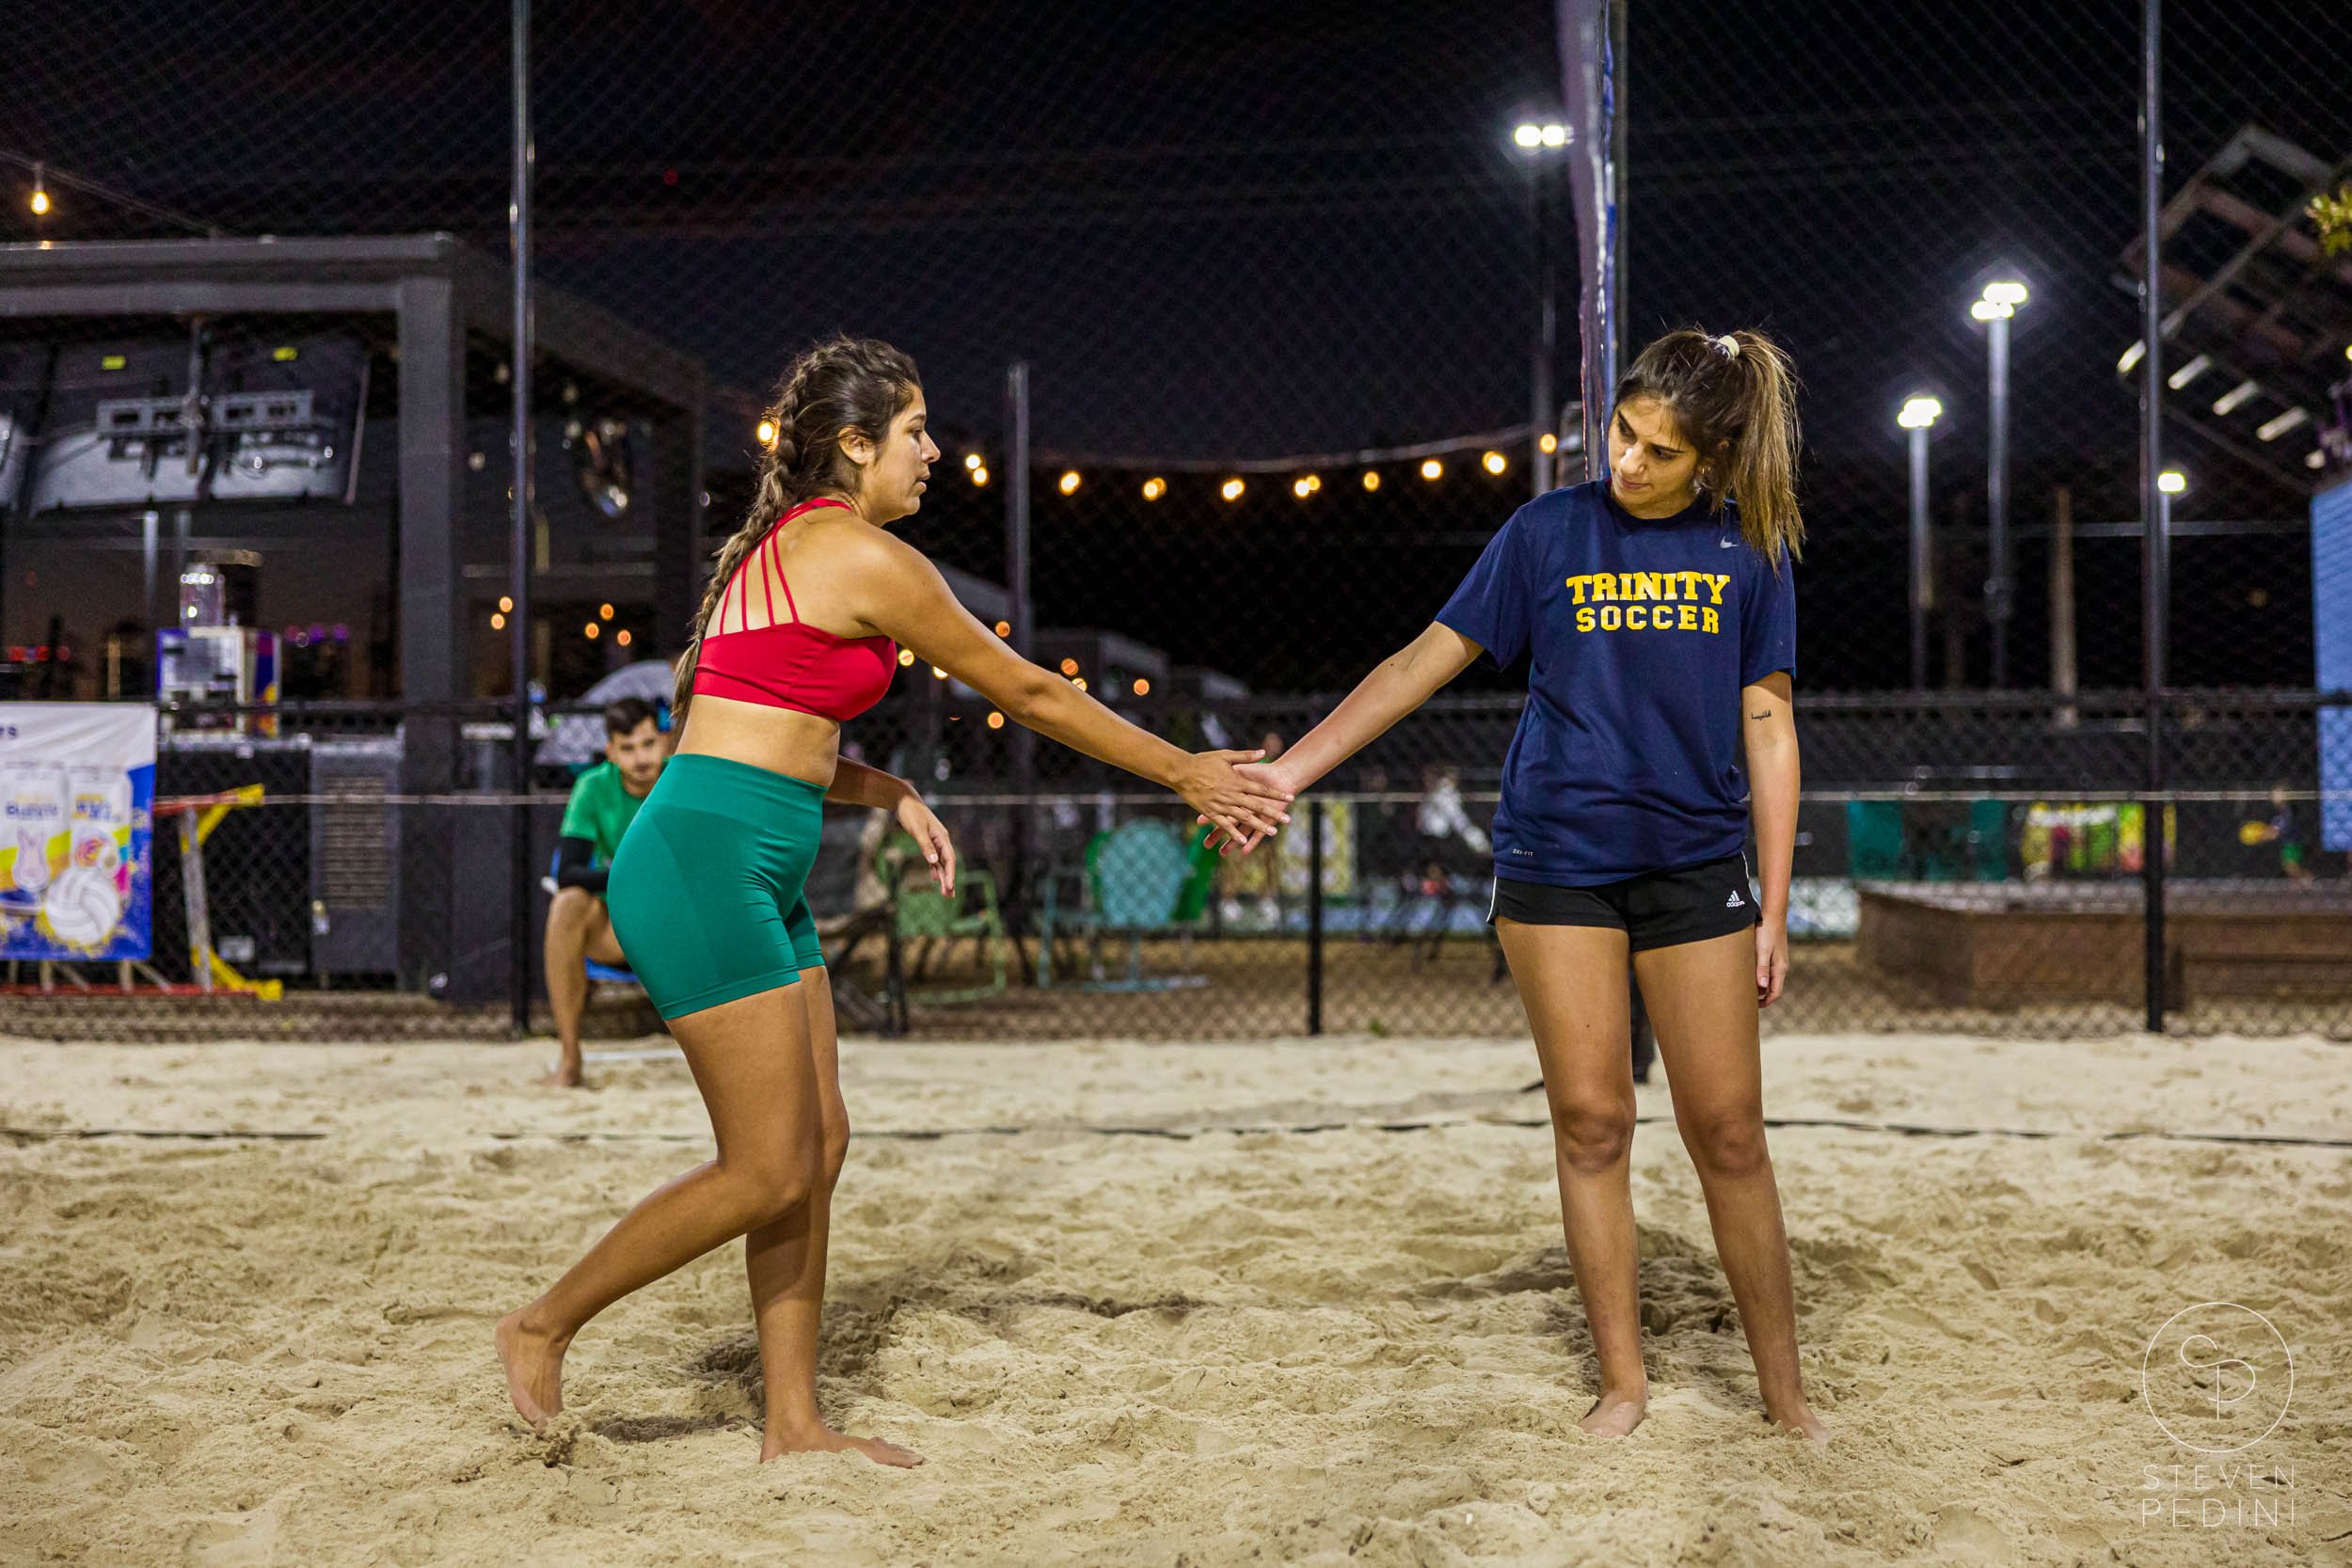 Steven Pedini Photography - Bumpy Pickle - Sand Volleyball - Houston TX - World Cup of Volleyball - 00390.jpg